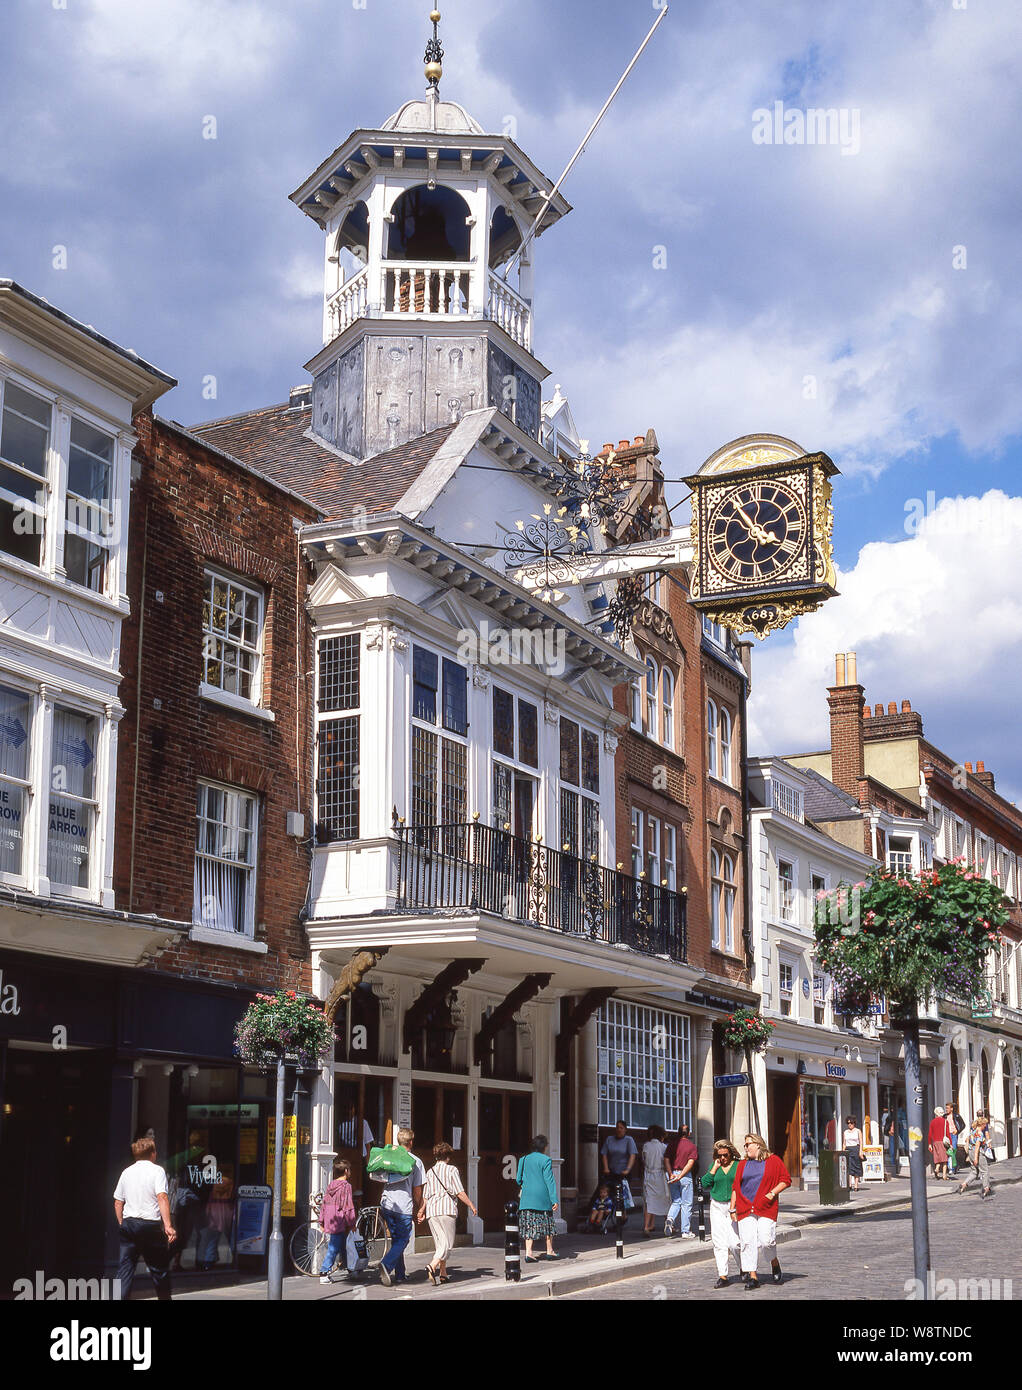 14th century Guildhall, High Street, Guildford, Surrey, England, United Kingdom Stock Photo